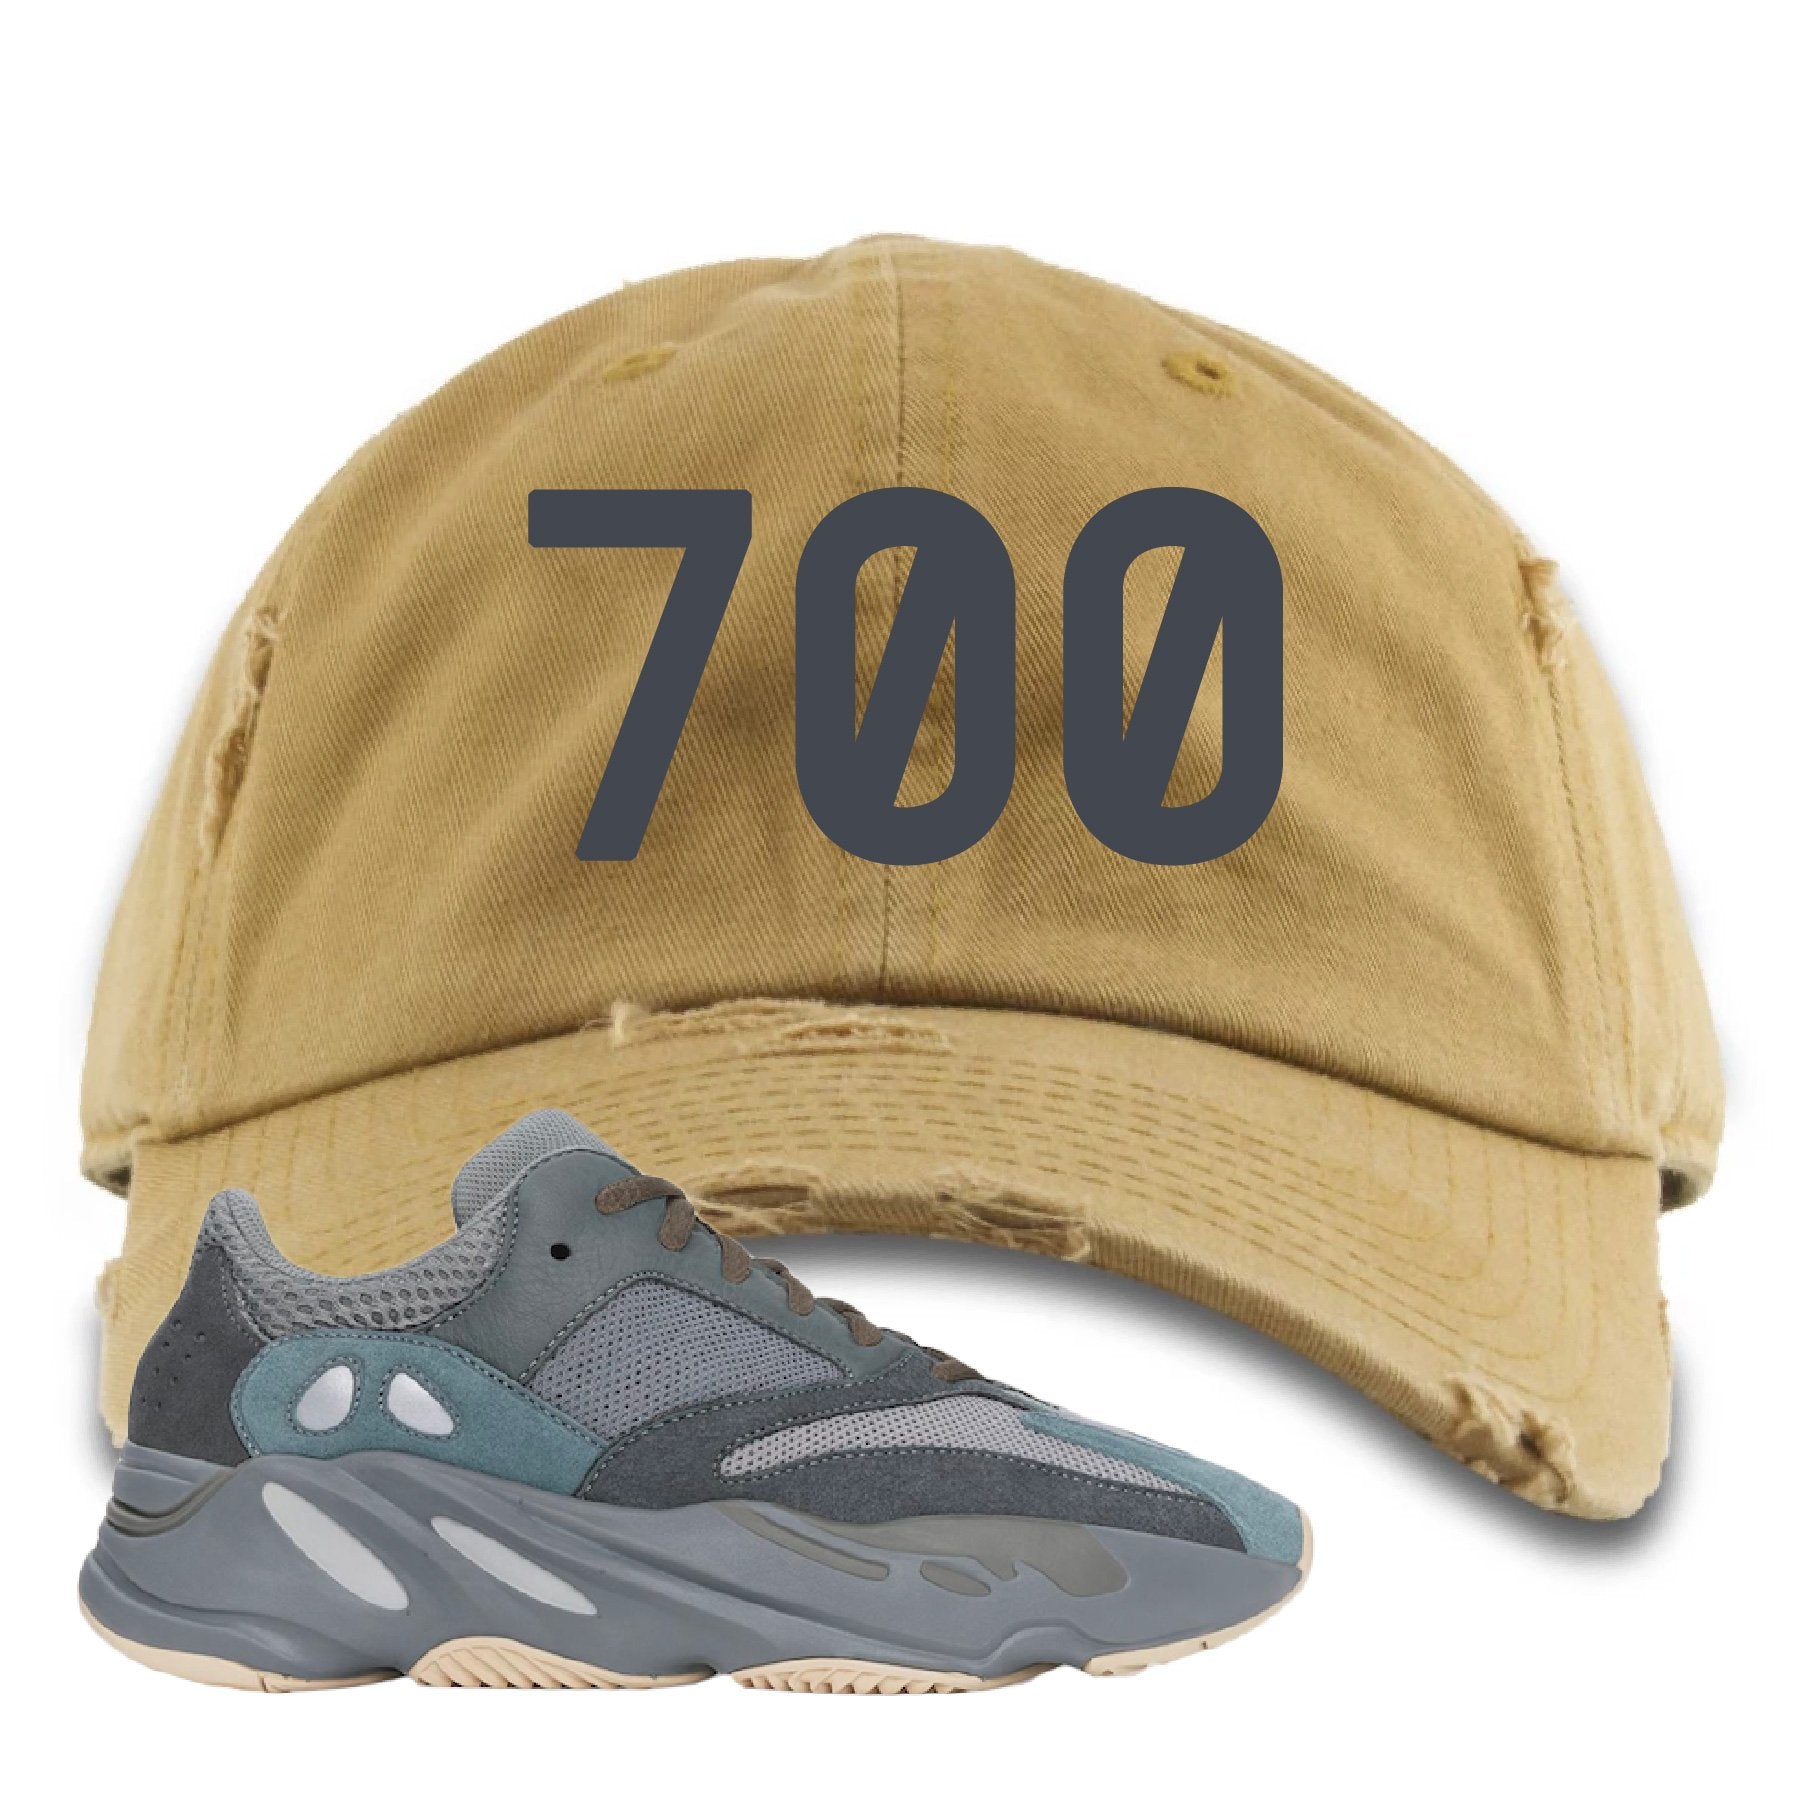 Yeezy Boost 700 Teal Blue 700 Timberland Sneaker Hook Up Distressed Dad Hat